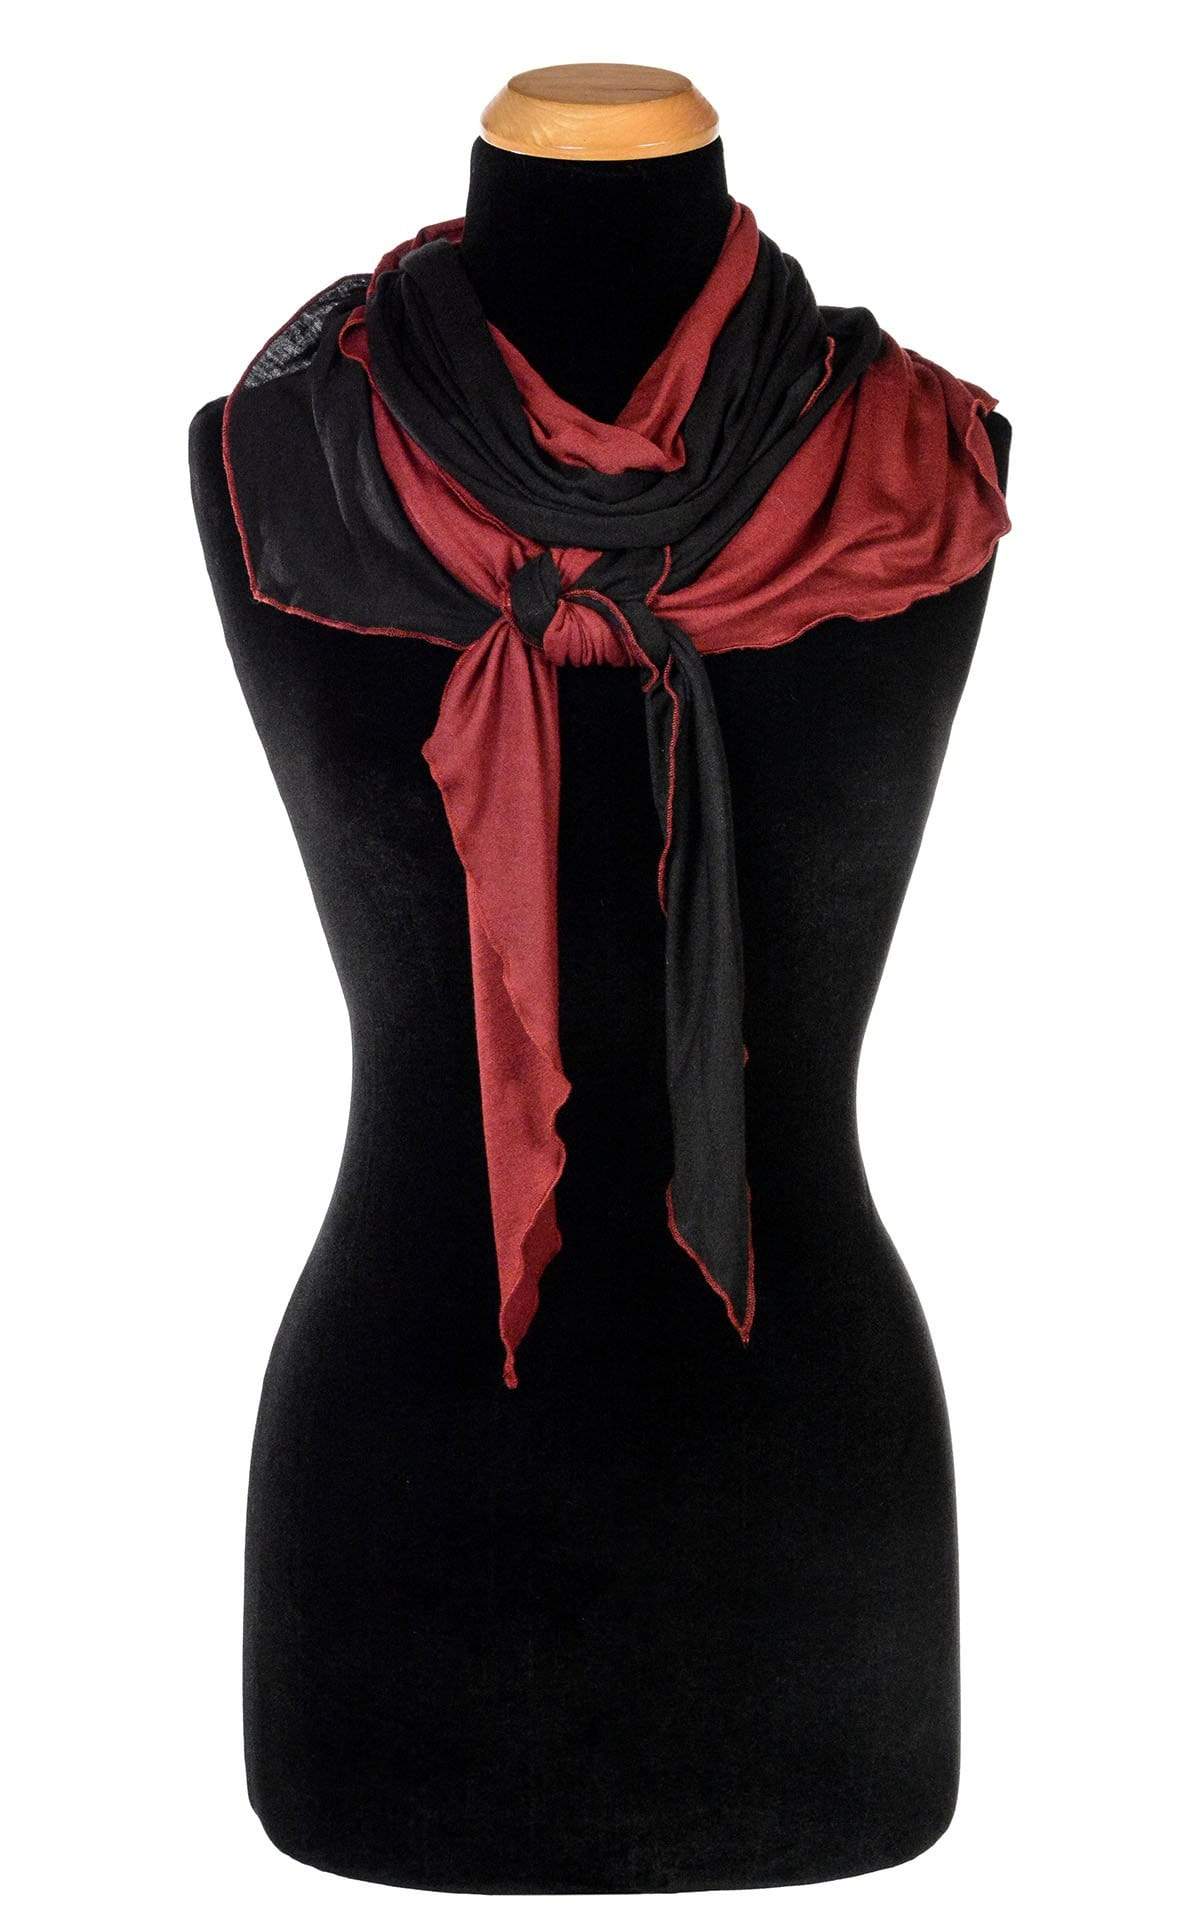 Ladies Large Handkerchief Scarf, Wrap shown tied in front  jersey knit fabric on a mannequin | Abyss W/ Blood Mooni, black and red| Handmade in Seattle WA | Pandemonium Millinery